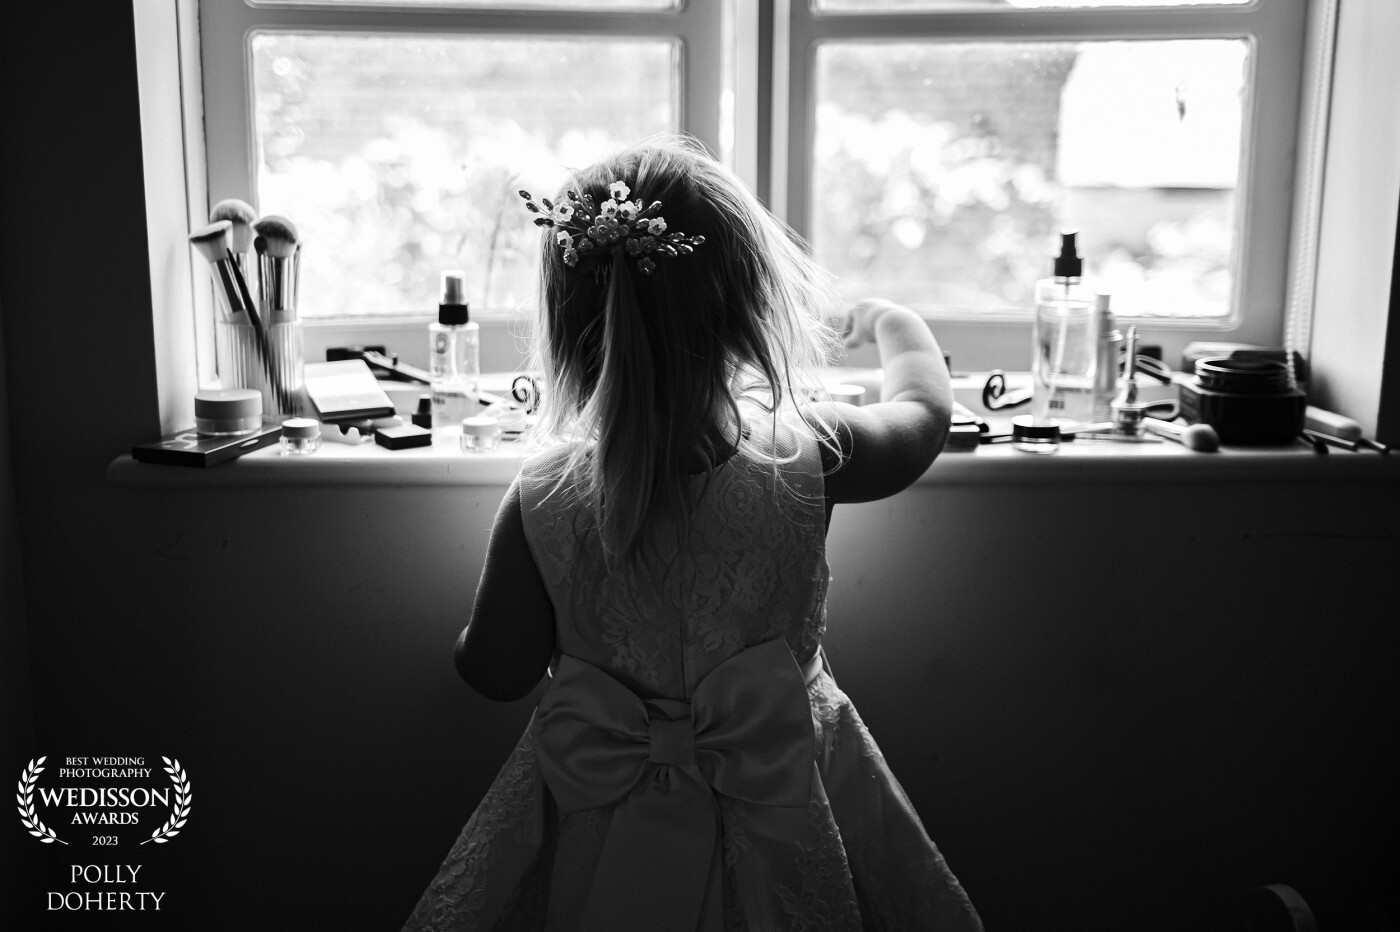 Little girls love to role play, she was keen to play with all the make up brushes on the windowsill. Simple real moment captured here at Park Farm Weddings, Northampton.